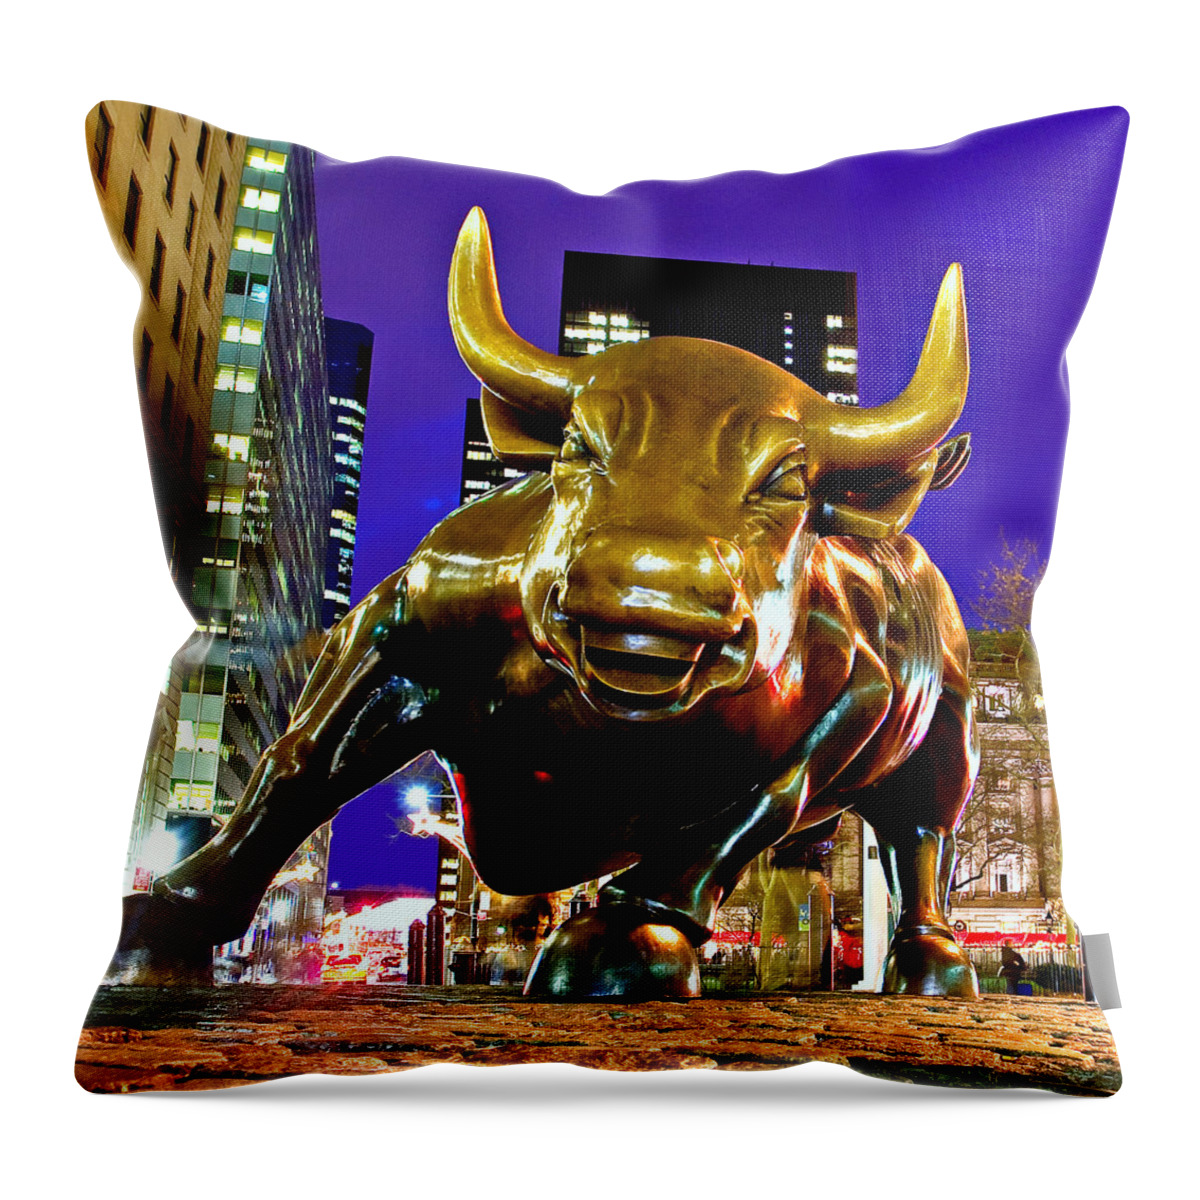 Estock Throw Pillow featuring the digital art Charging Bull, Financial District, Nyc by Claudia Uripos